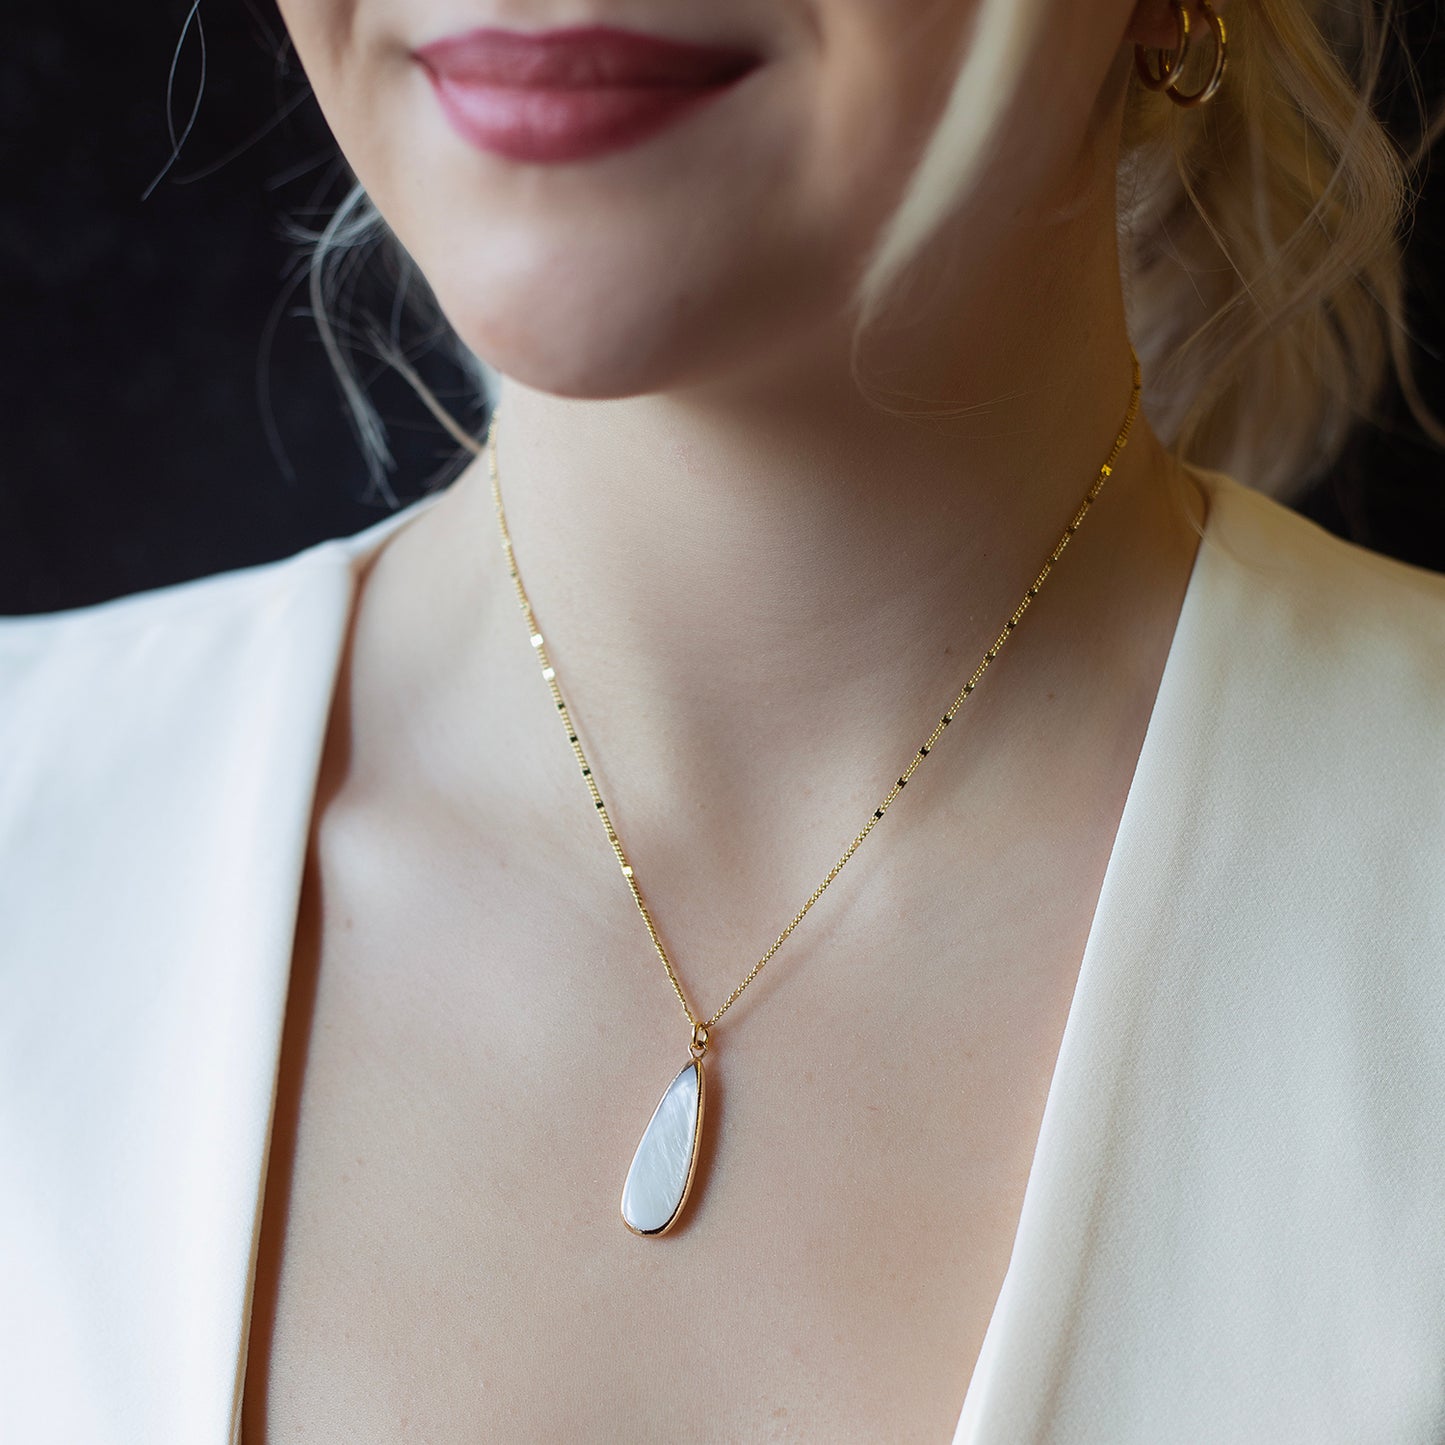 Intentions Necklace, Mother of Pearl Teardrop